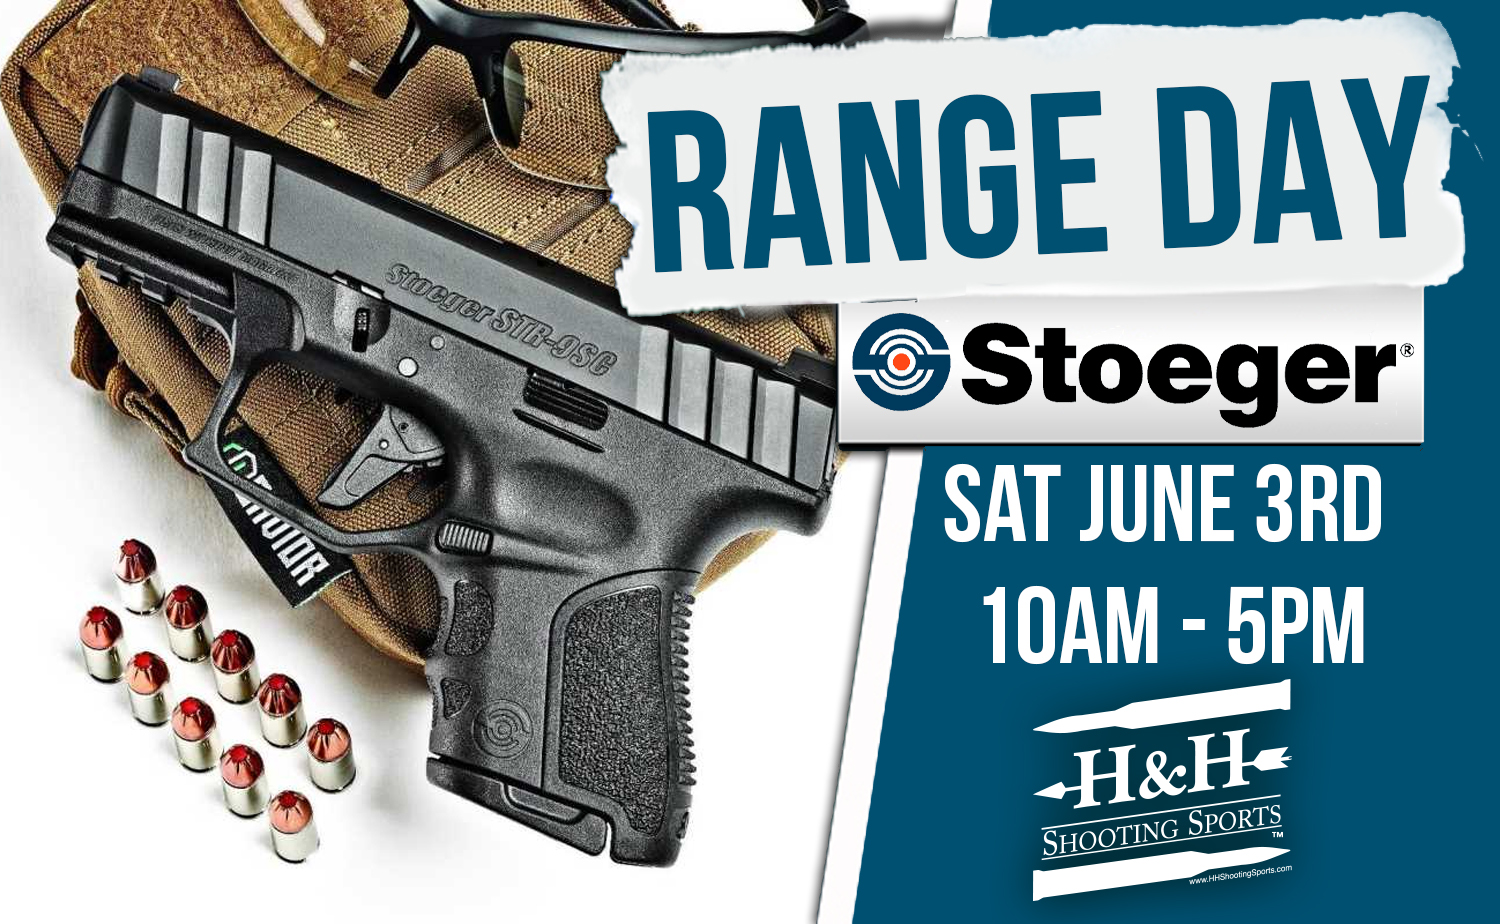 Range Day with Stoeger gun and bullets information Oklahoma City, OK